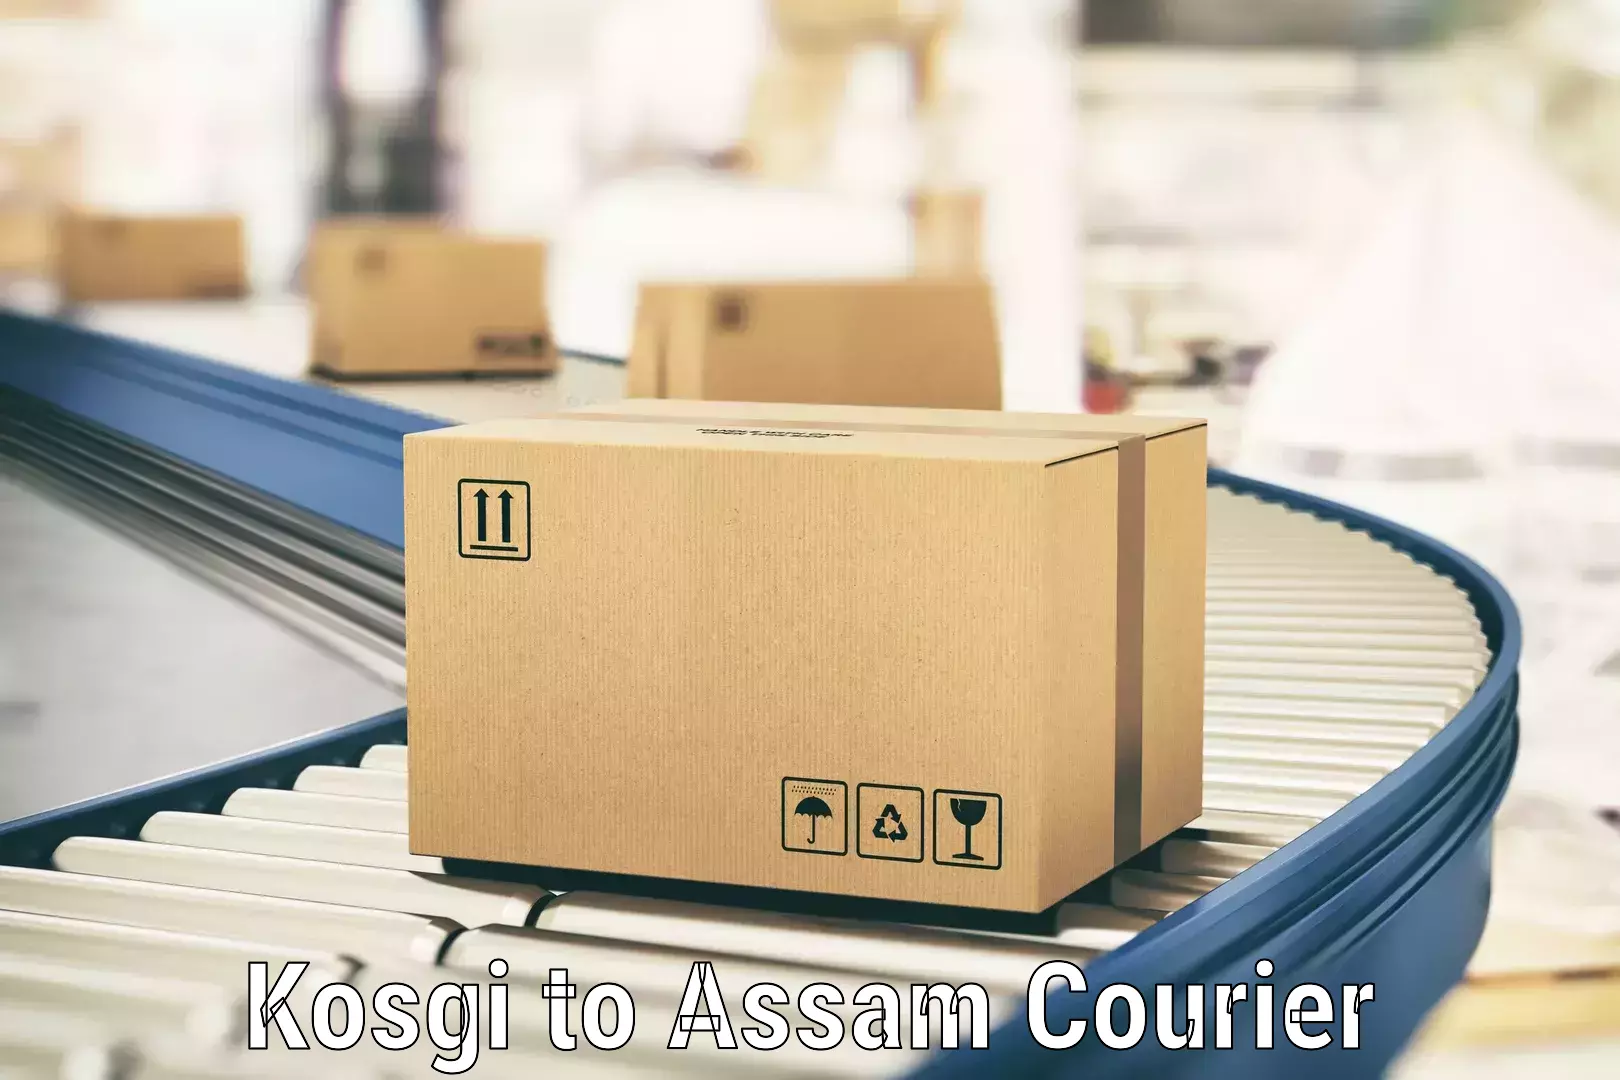 Fast shipping solutions in Kosgi to Lala Assam